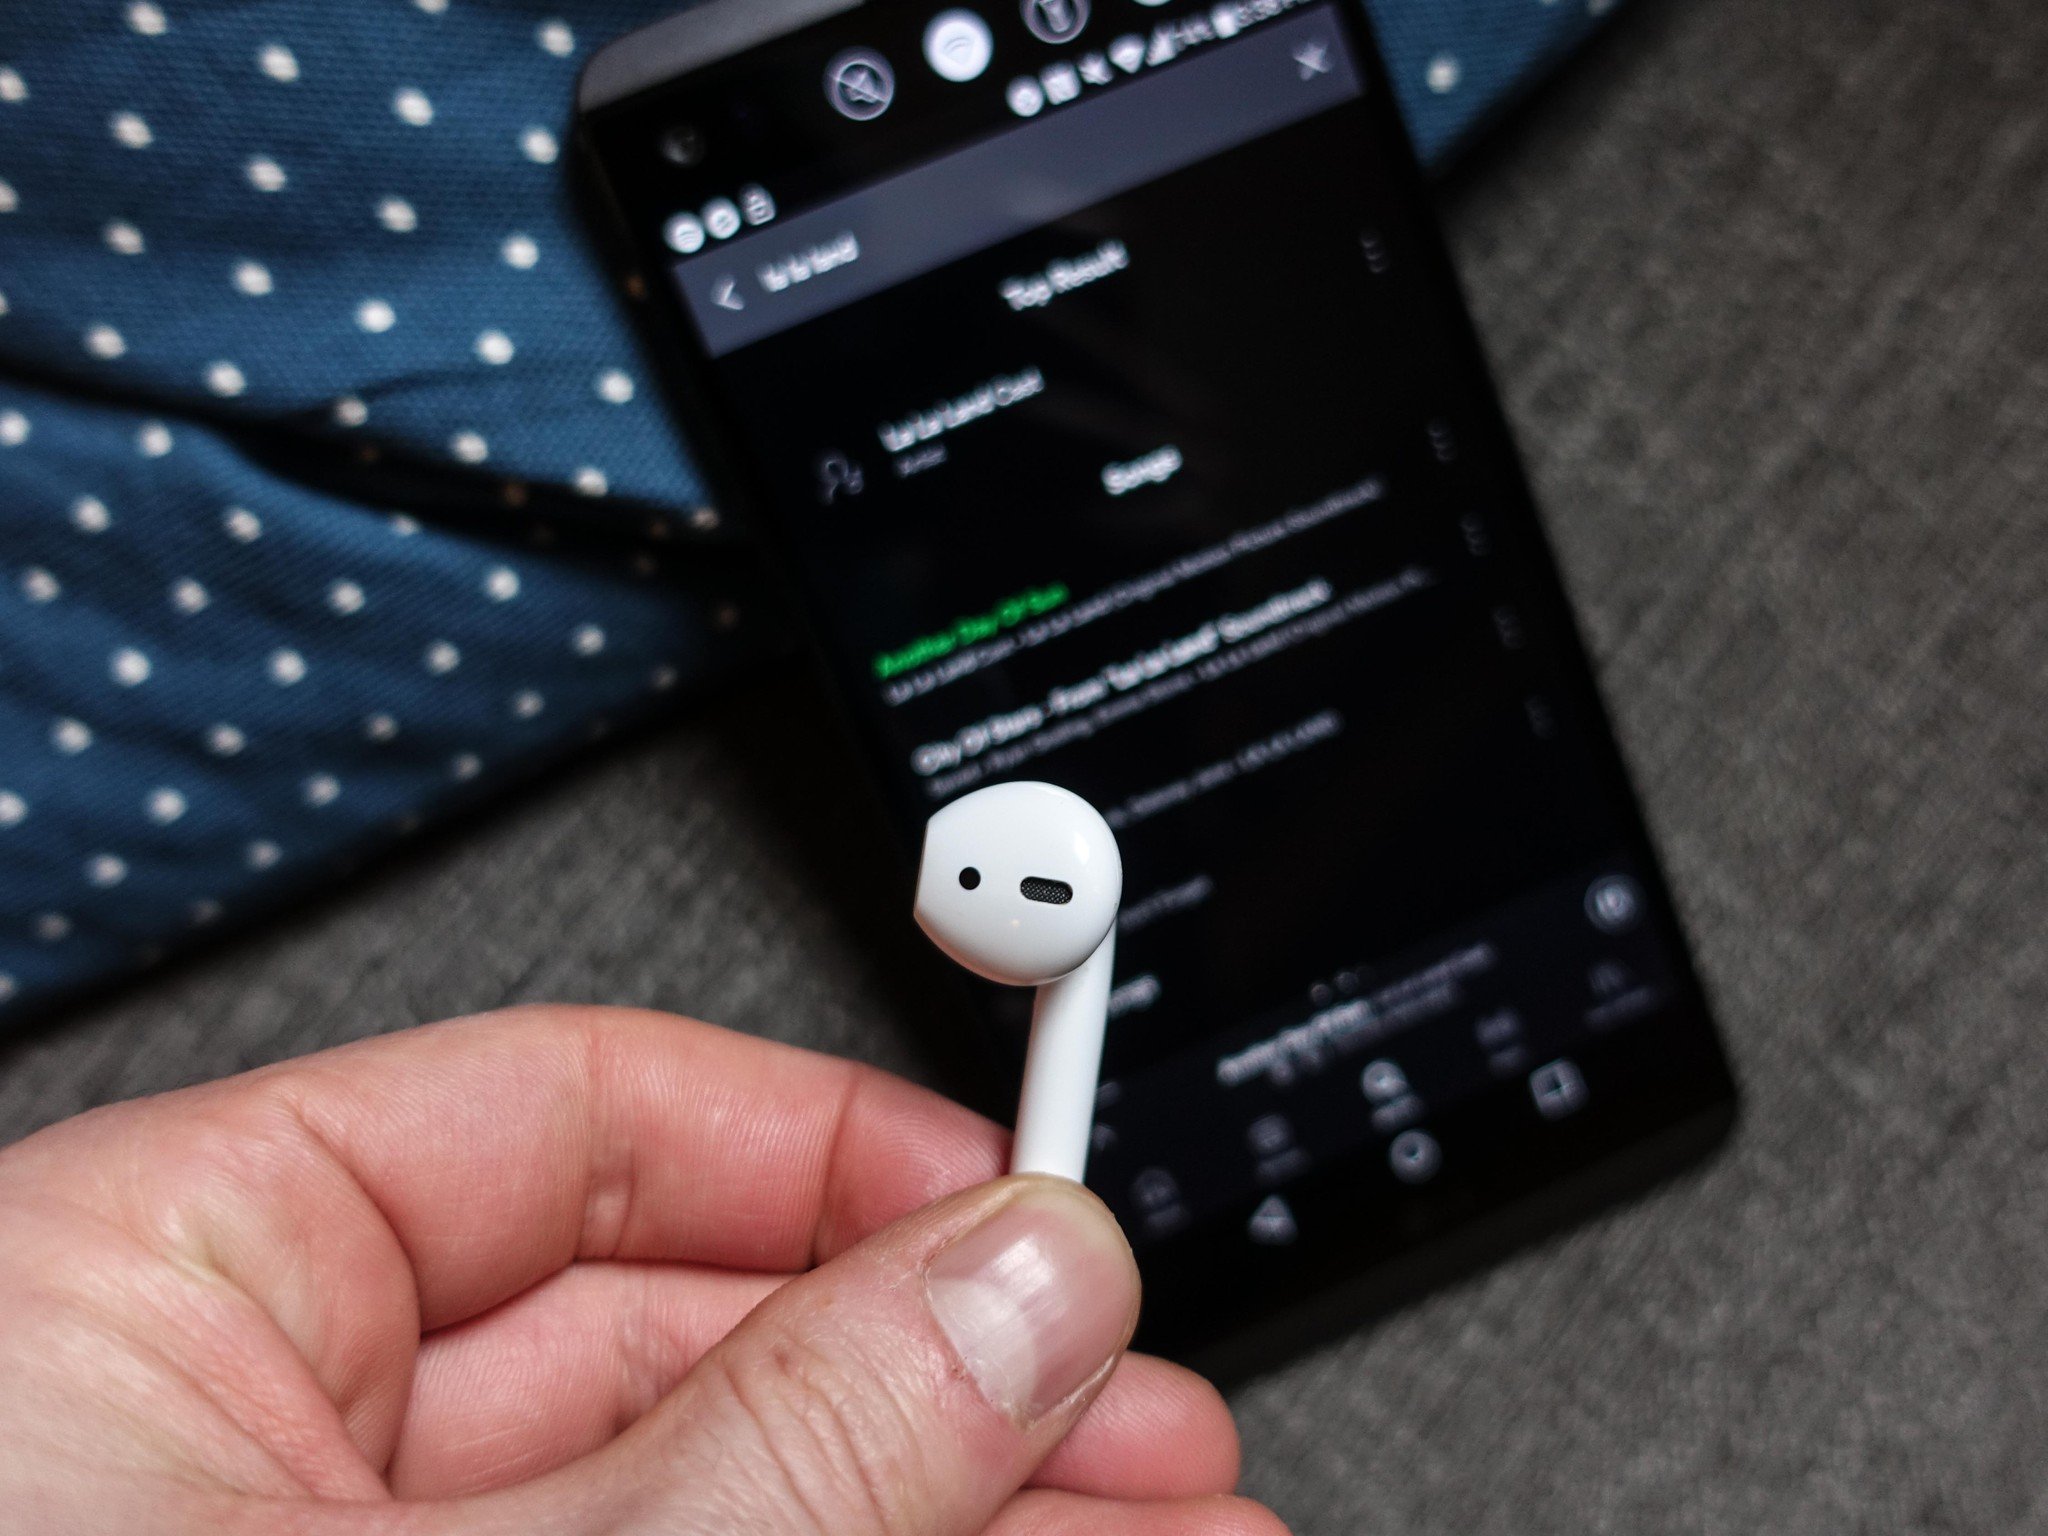 AirPods Android